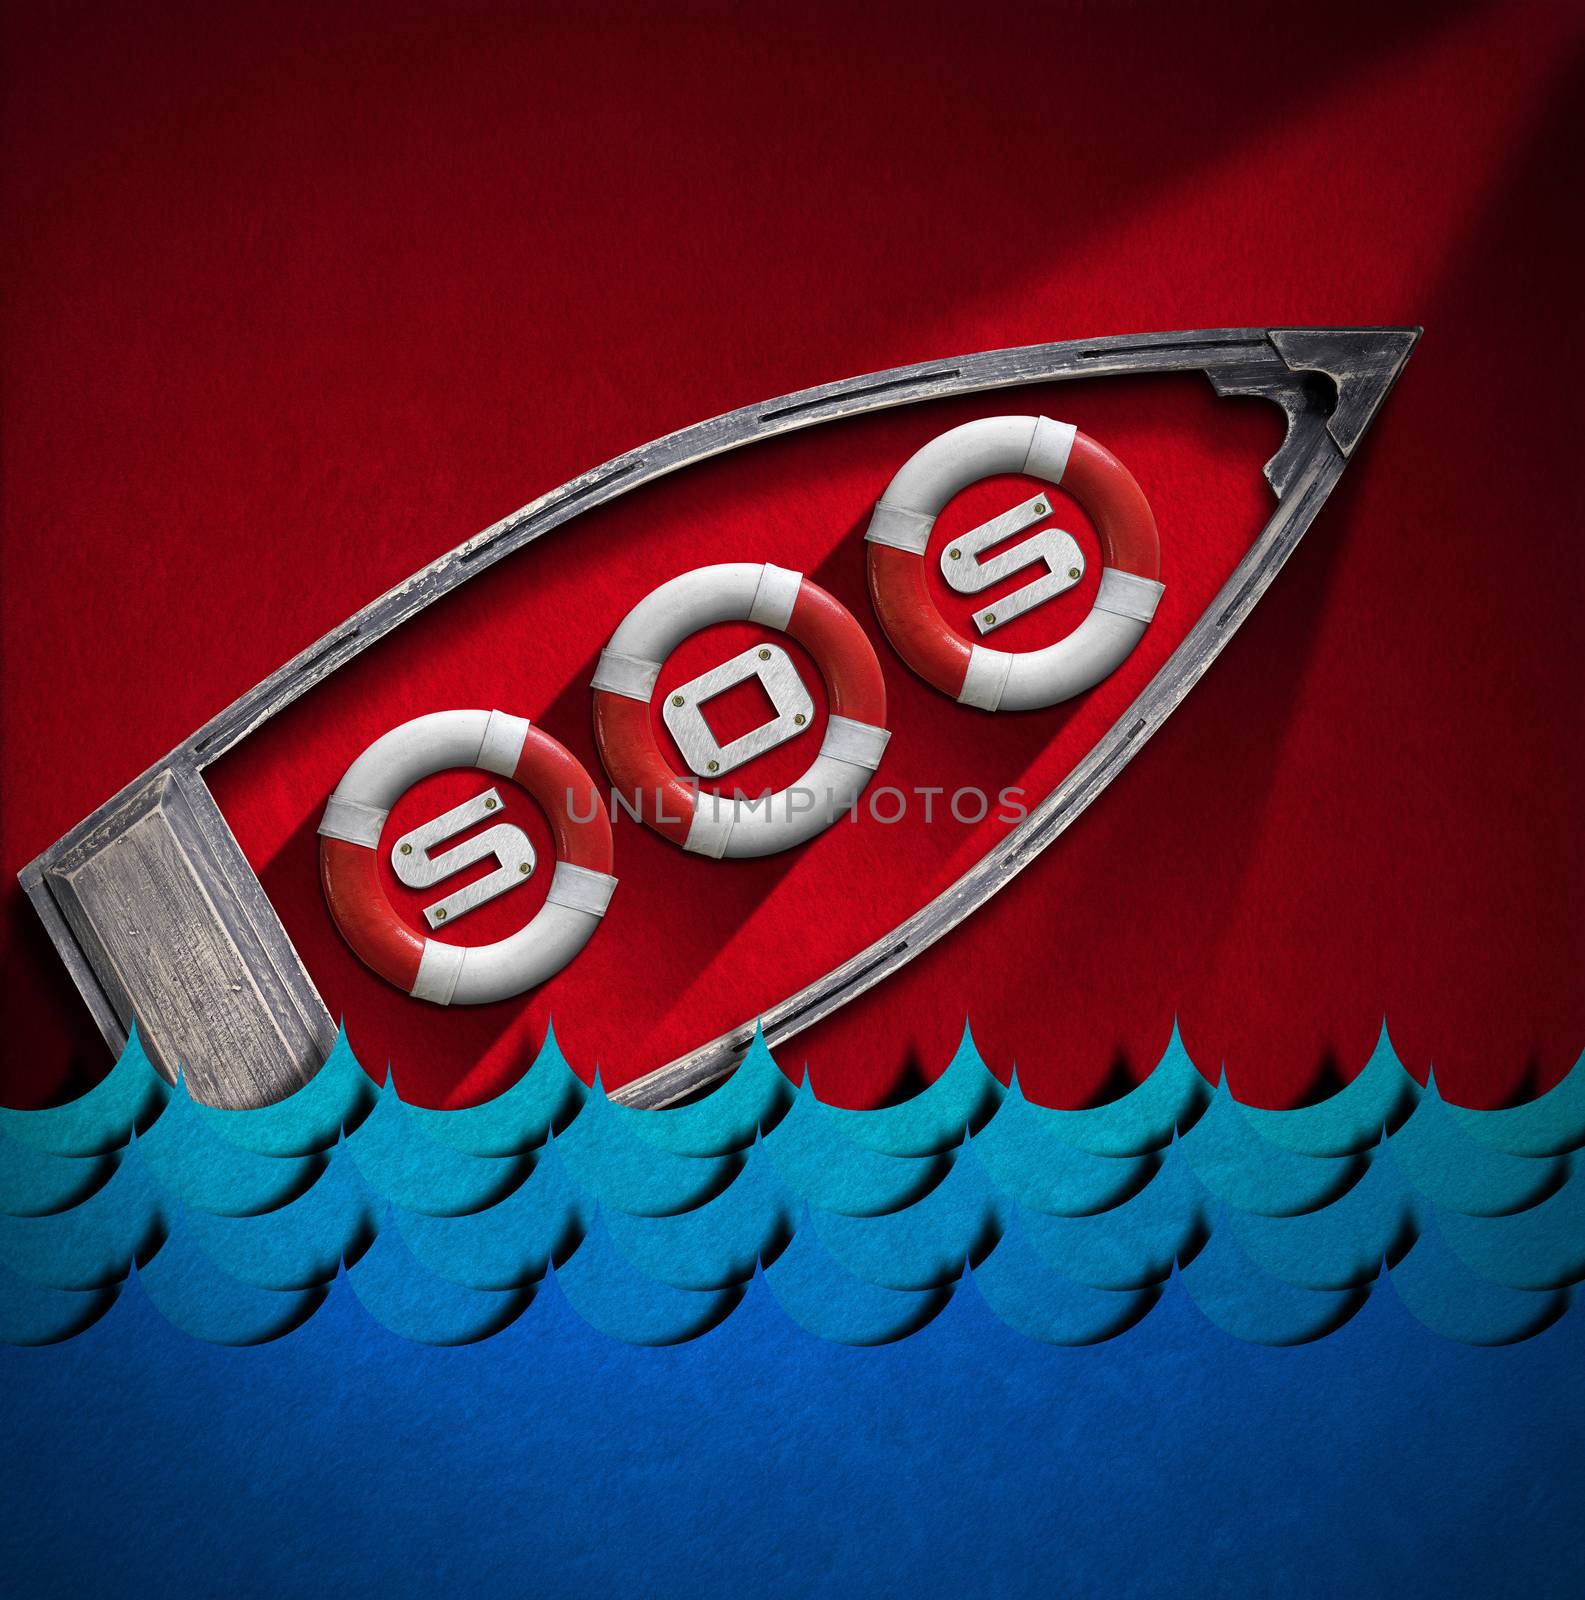 Red and white lifebuoys in a small wooden boat with text SOS and blue sea waves in a red velvet background. Help concept